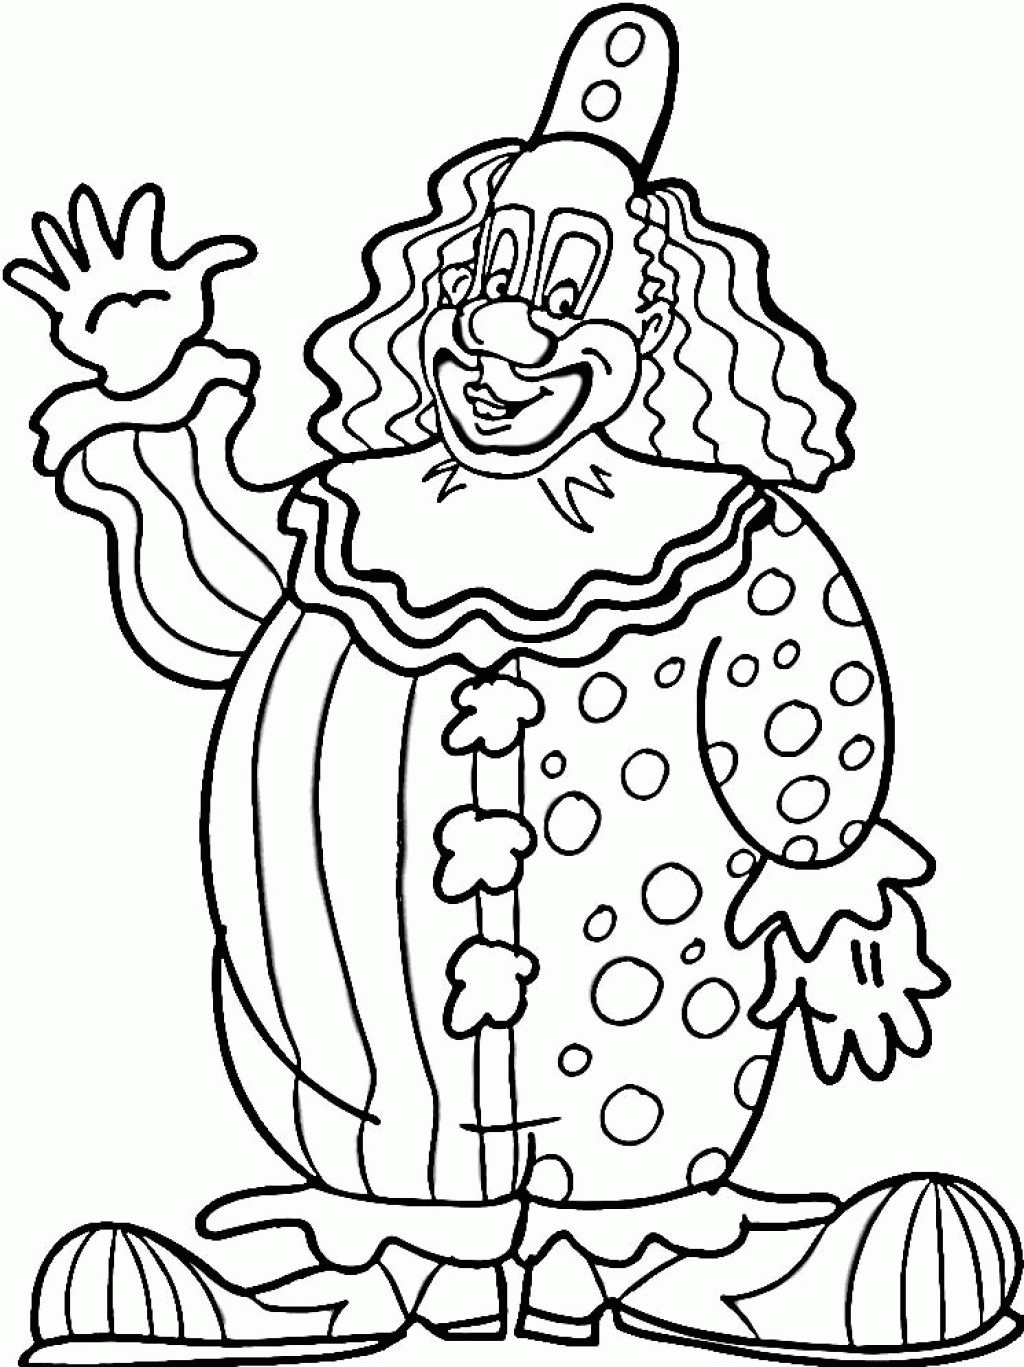 Printable Clown Coloring Pages | Coloring Me